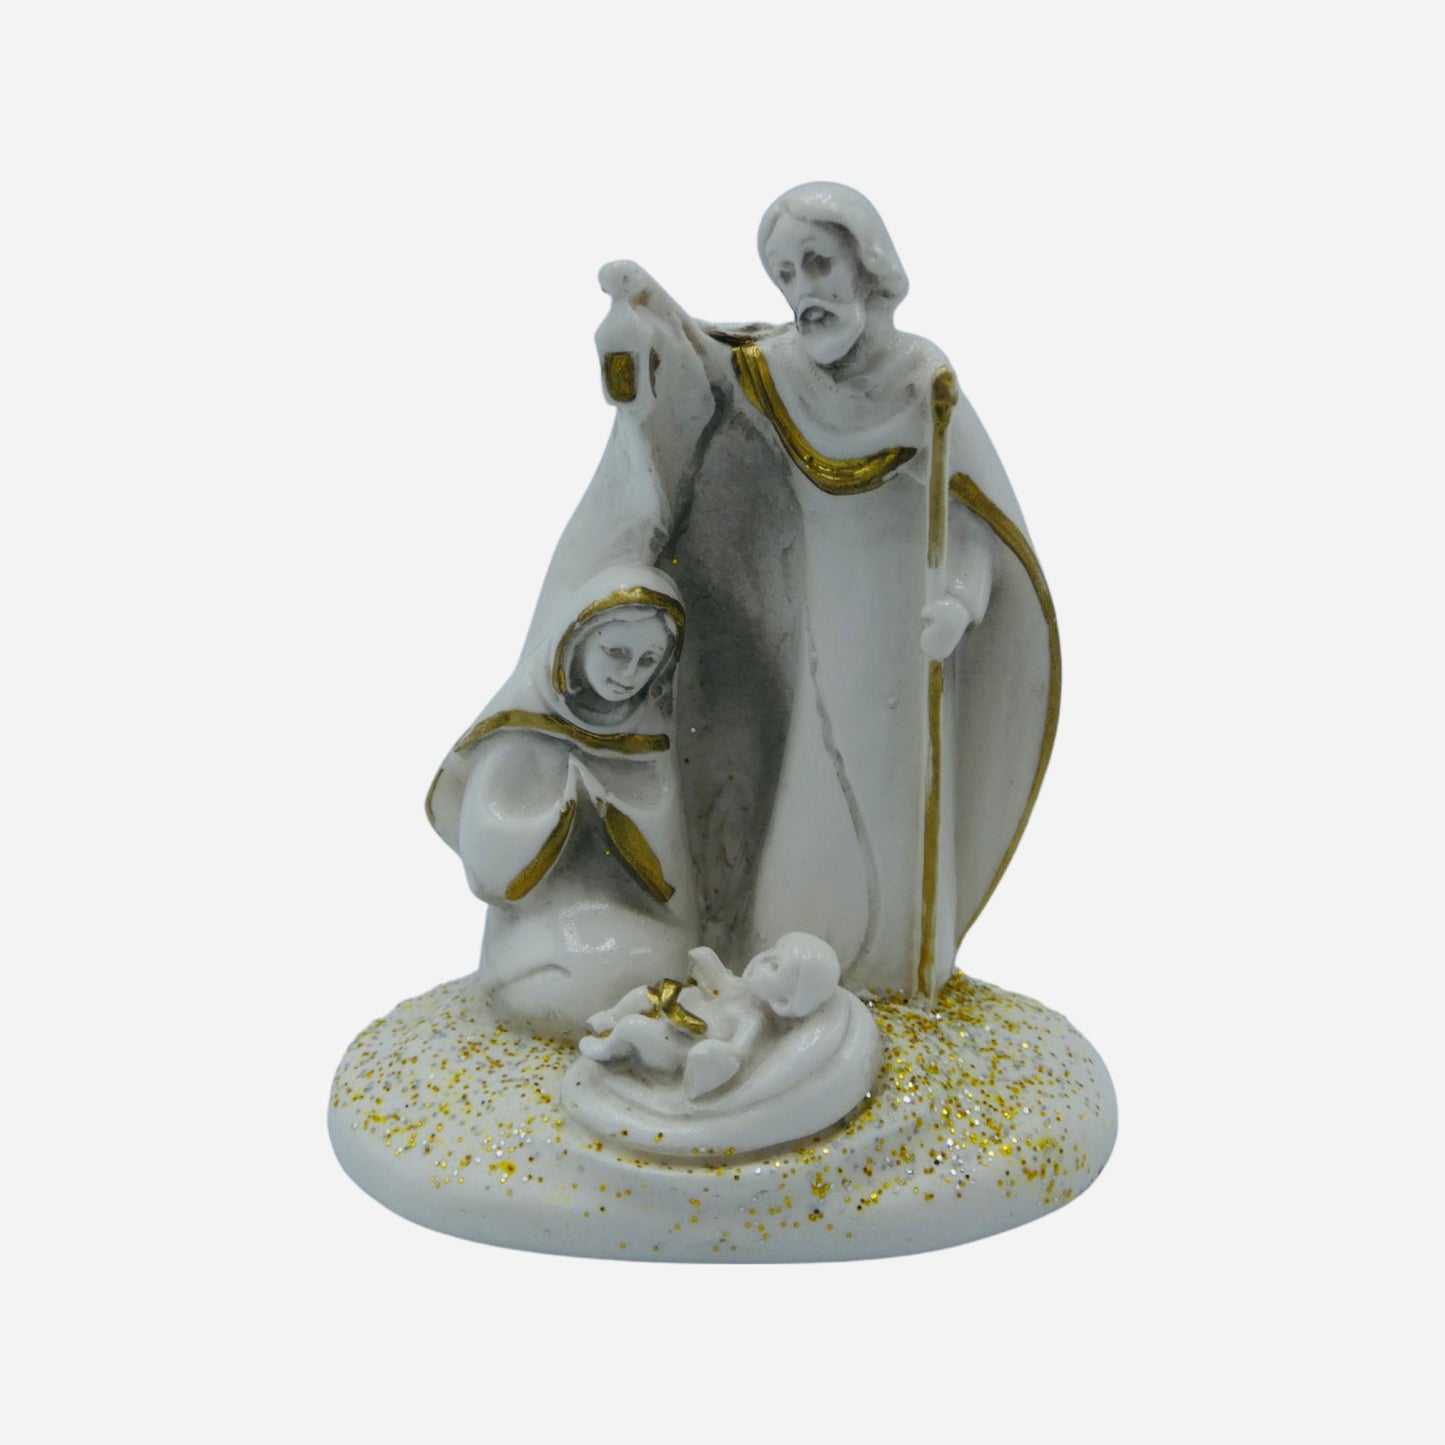 White Holy Family Statue